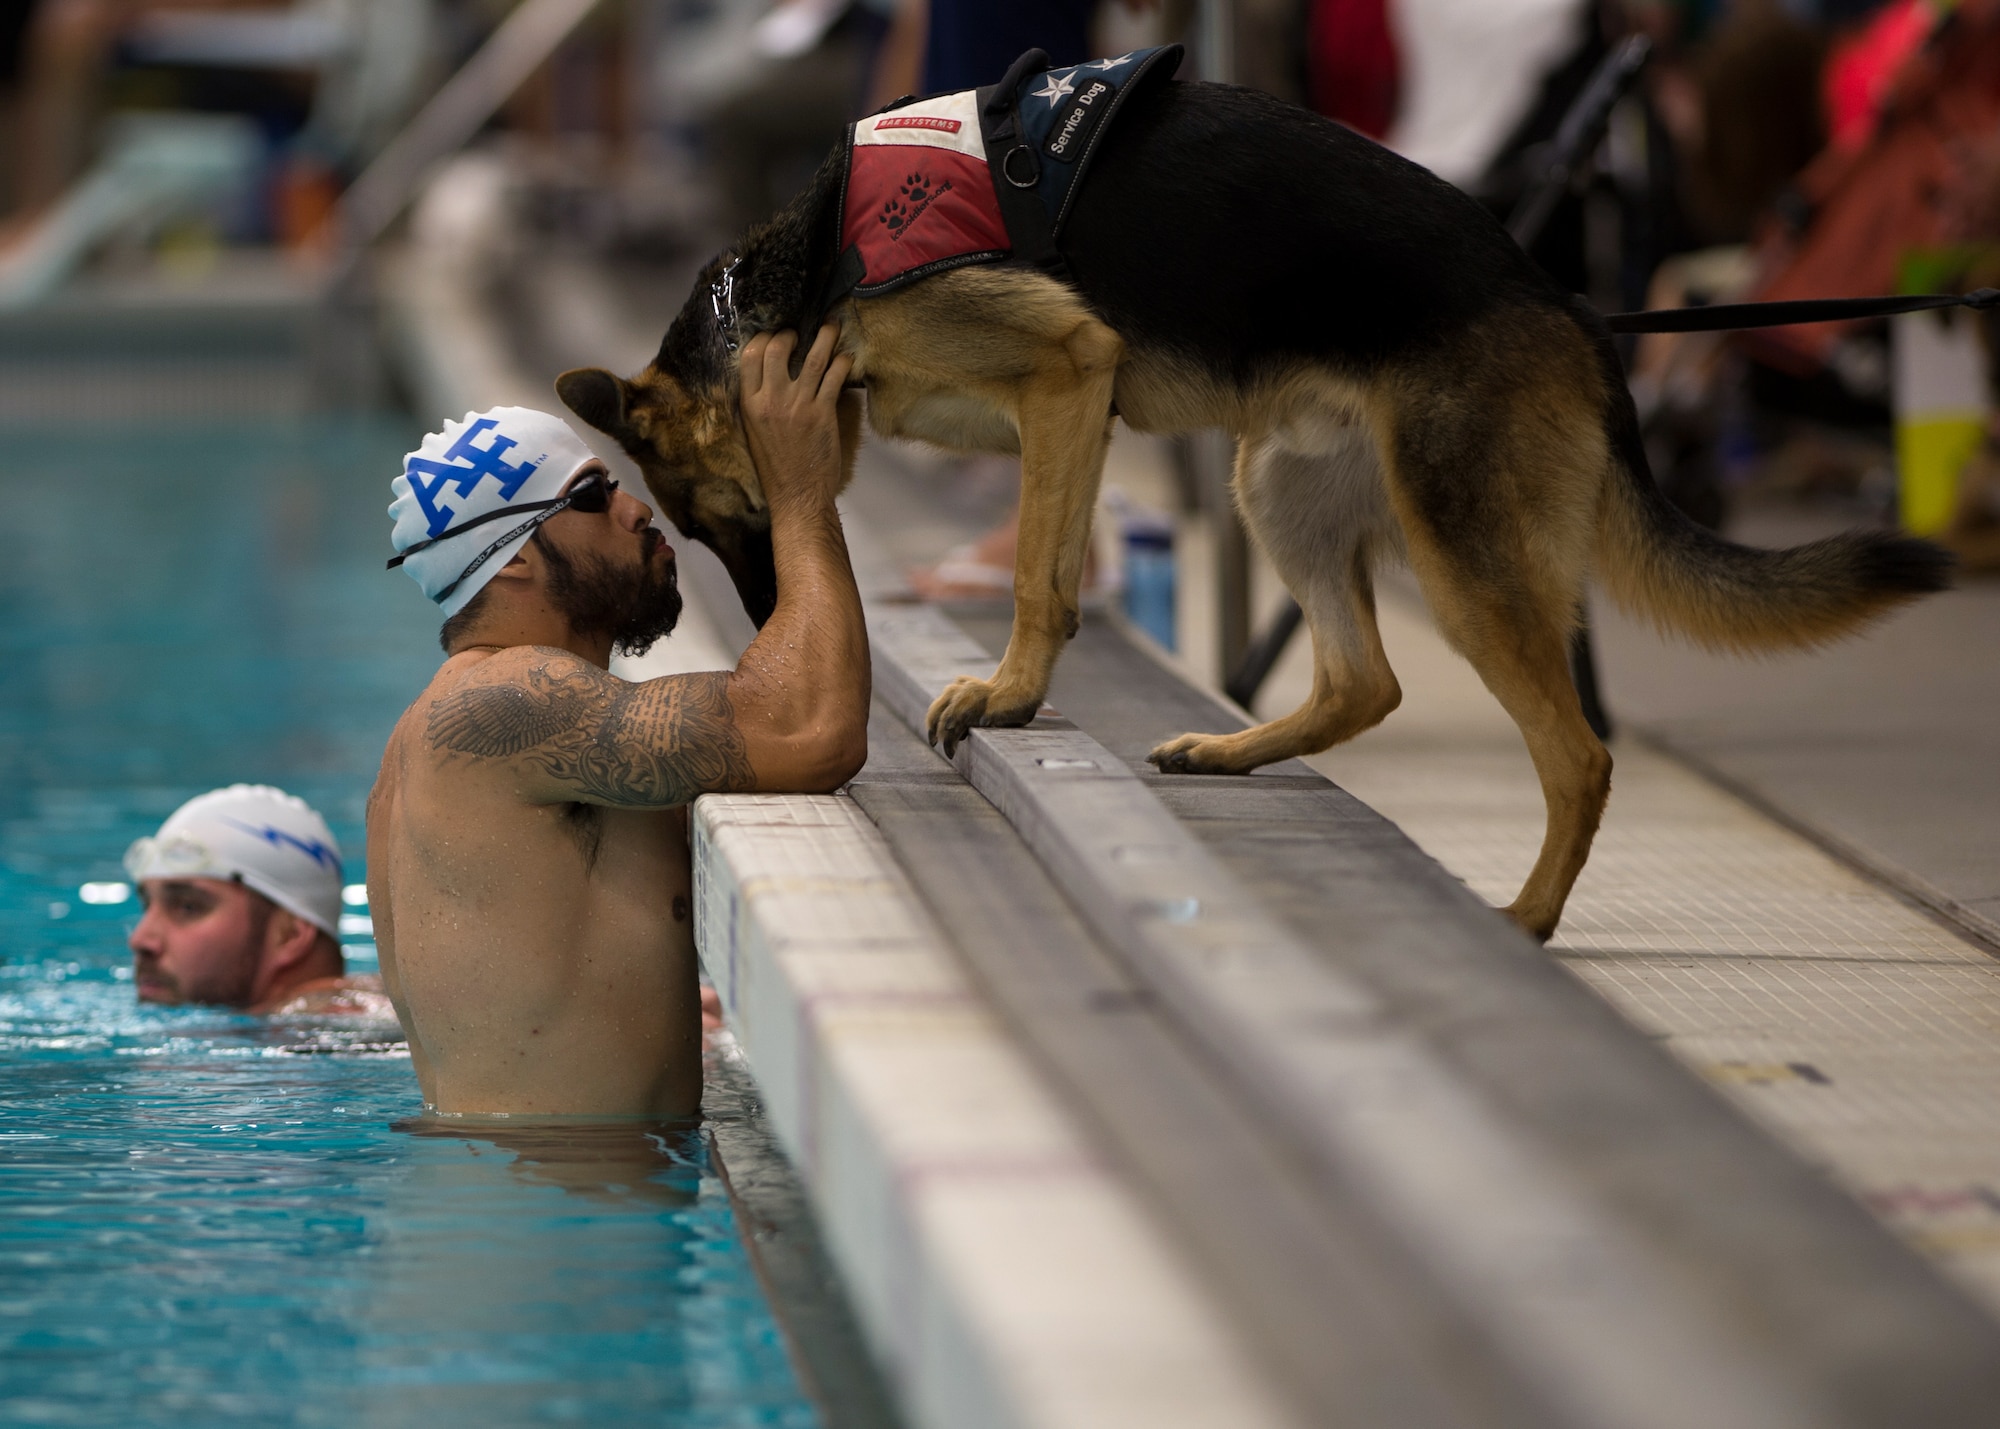 Air Force athlete August O'Niell kisses his service dog, Kai, during warmups for the swimming portion of the 2014 Warrior Games Sept. 30, 2014, at the U.S. Olympic Training Center in Colorado Springs, Colo. The Warrior Games consist of athletes from the Defense Department, who compete in Paralympic-style events for their respective military branch. (U.S. Air Force photo/Senior Airman Justyn M. Freeman)